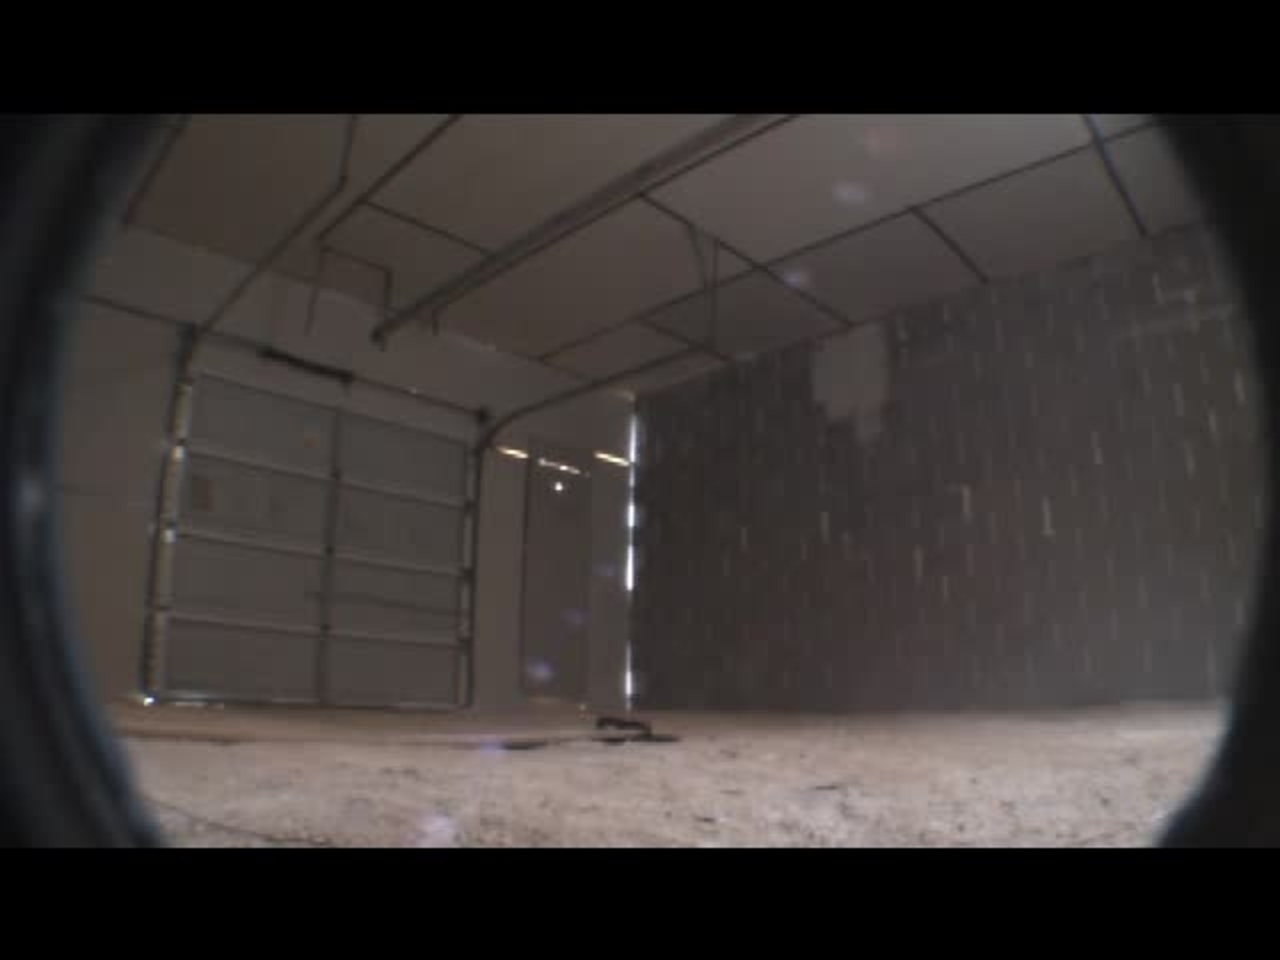 Test 13: Dispersion and Burning Behavior of Hydrogen Released in a Full-Scale Residential Garage in the Presence and Absence of Conventional Automobiles (View of garage interior from floor camera)